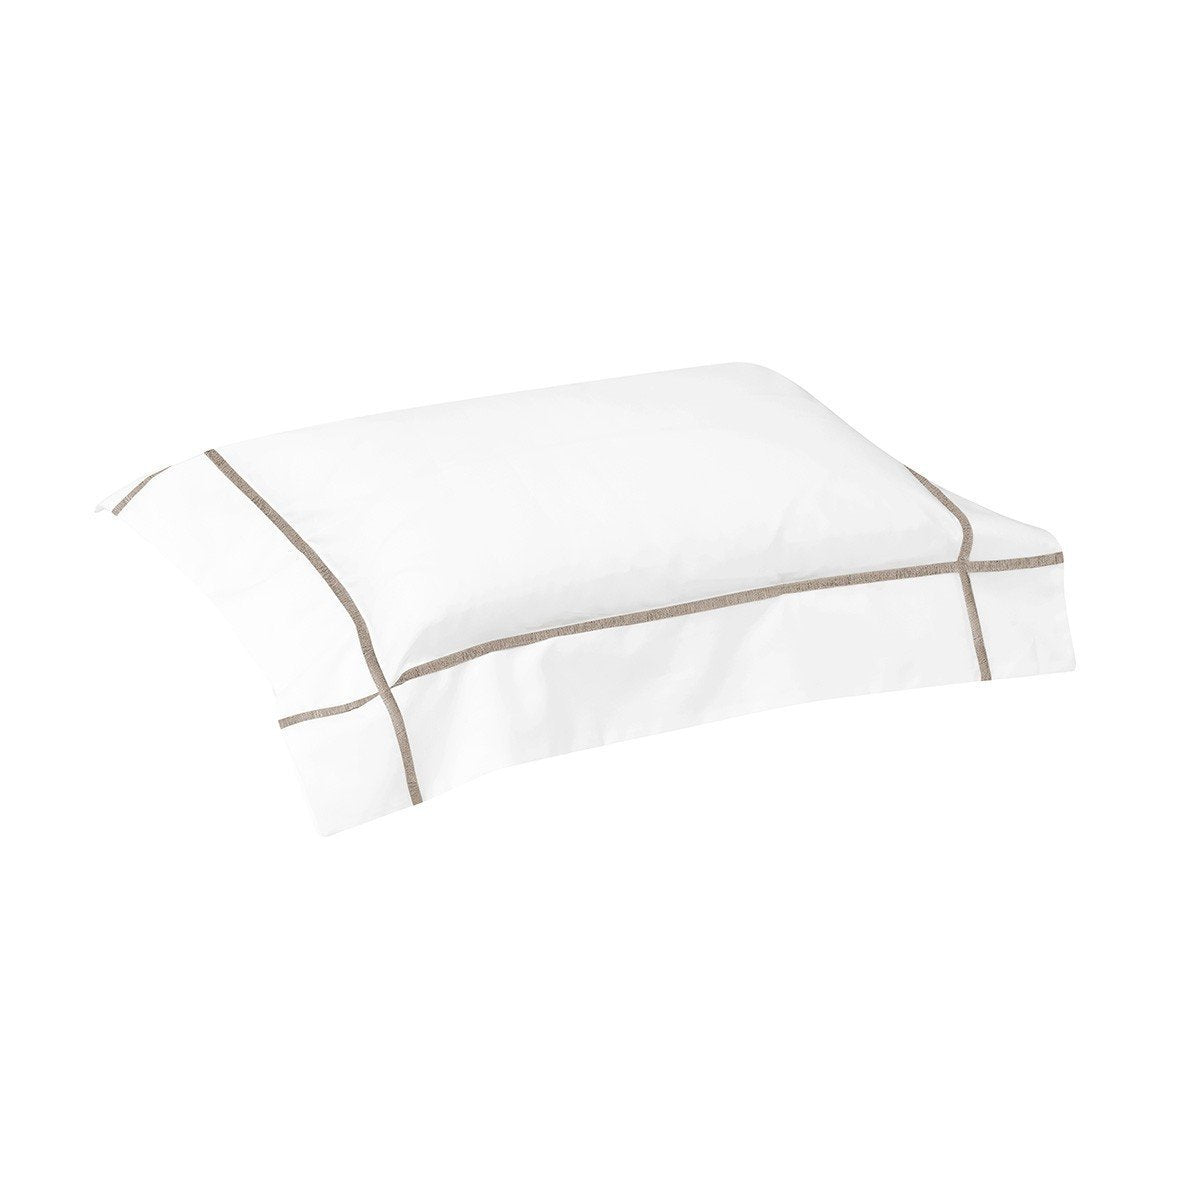 Athena Pierre Bedding Collection by Yves Delorme | Fig Linens - white bed linens, boudoir sham